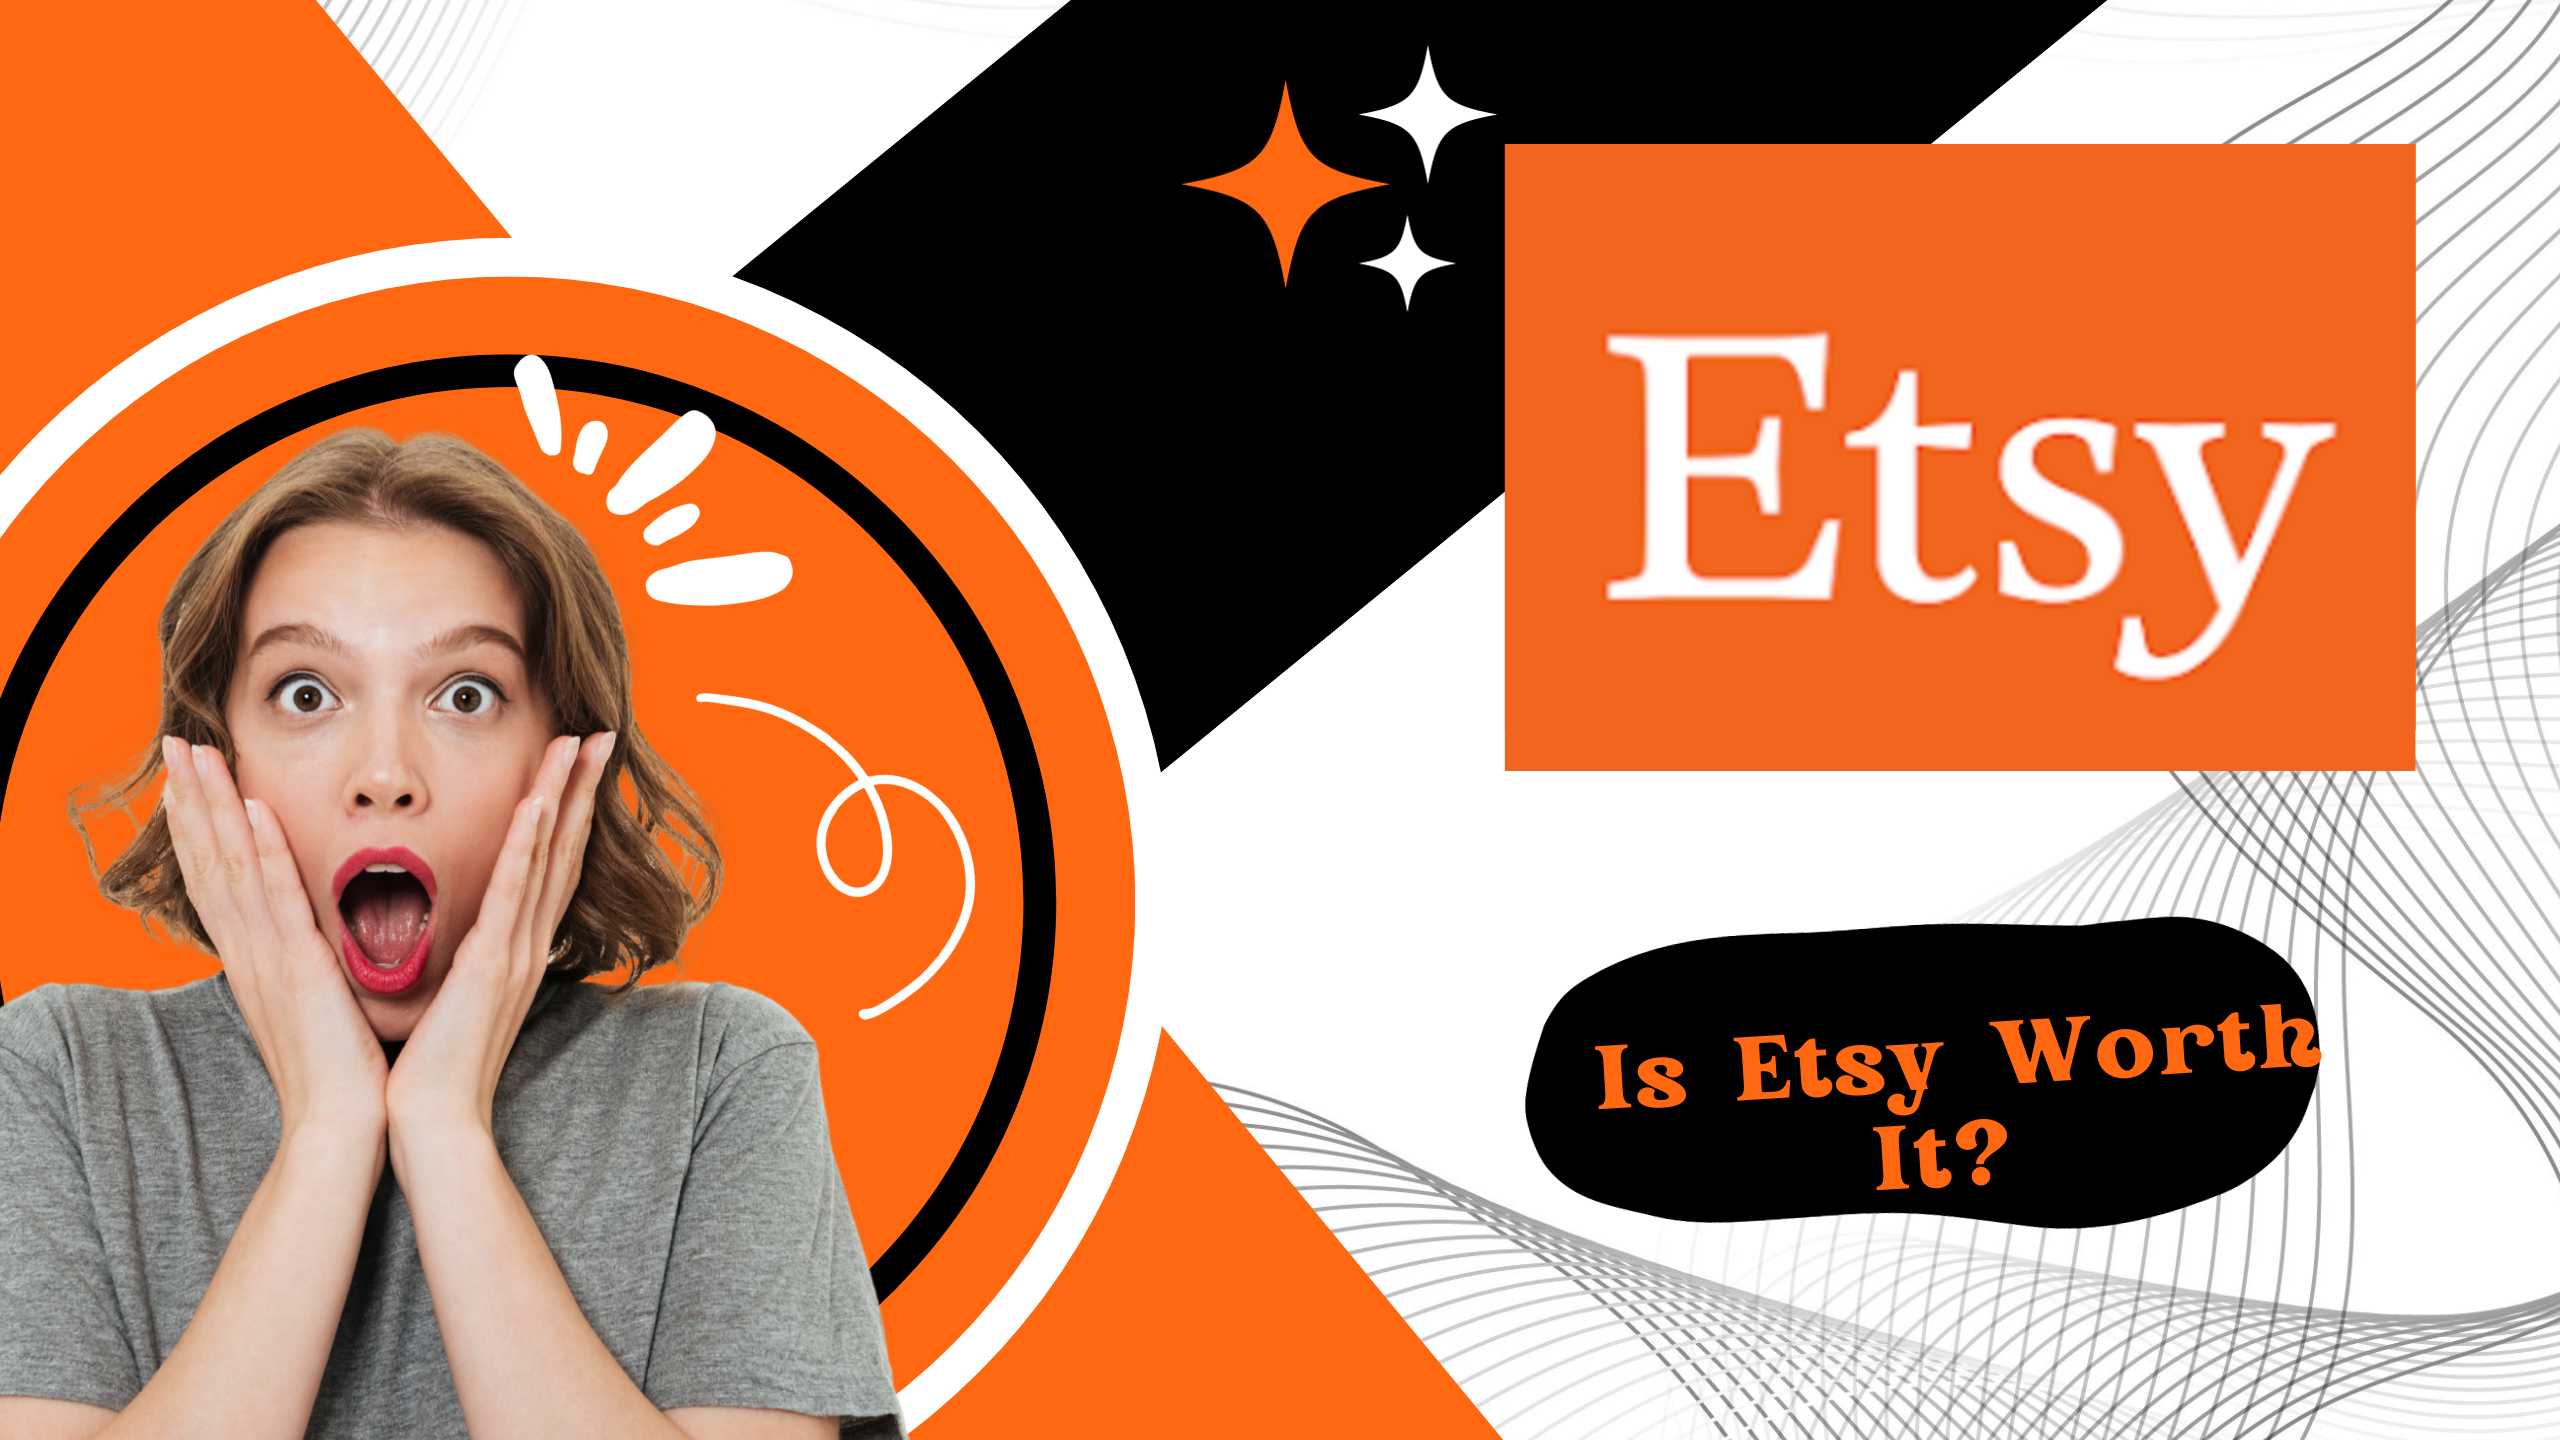 Is Etsy Worth It? Let's Find Out